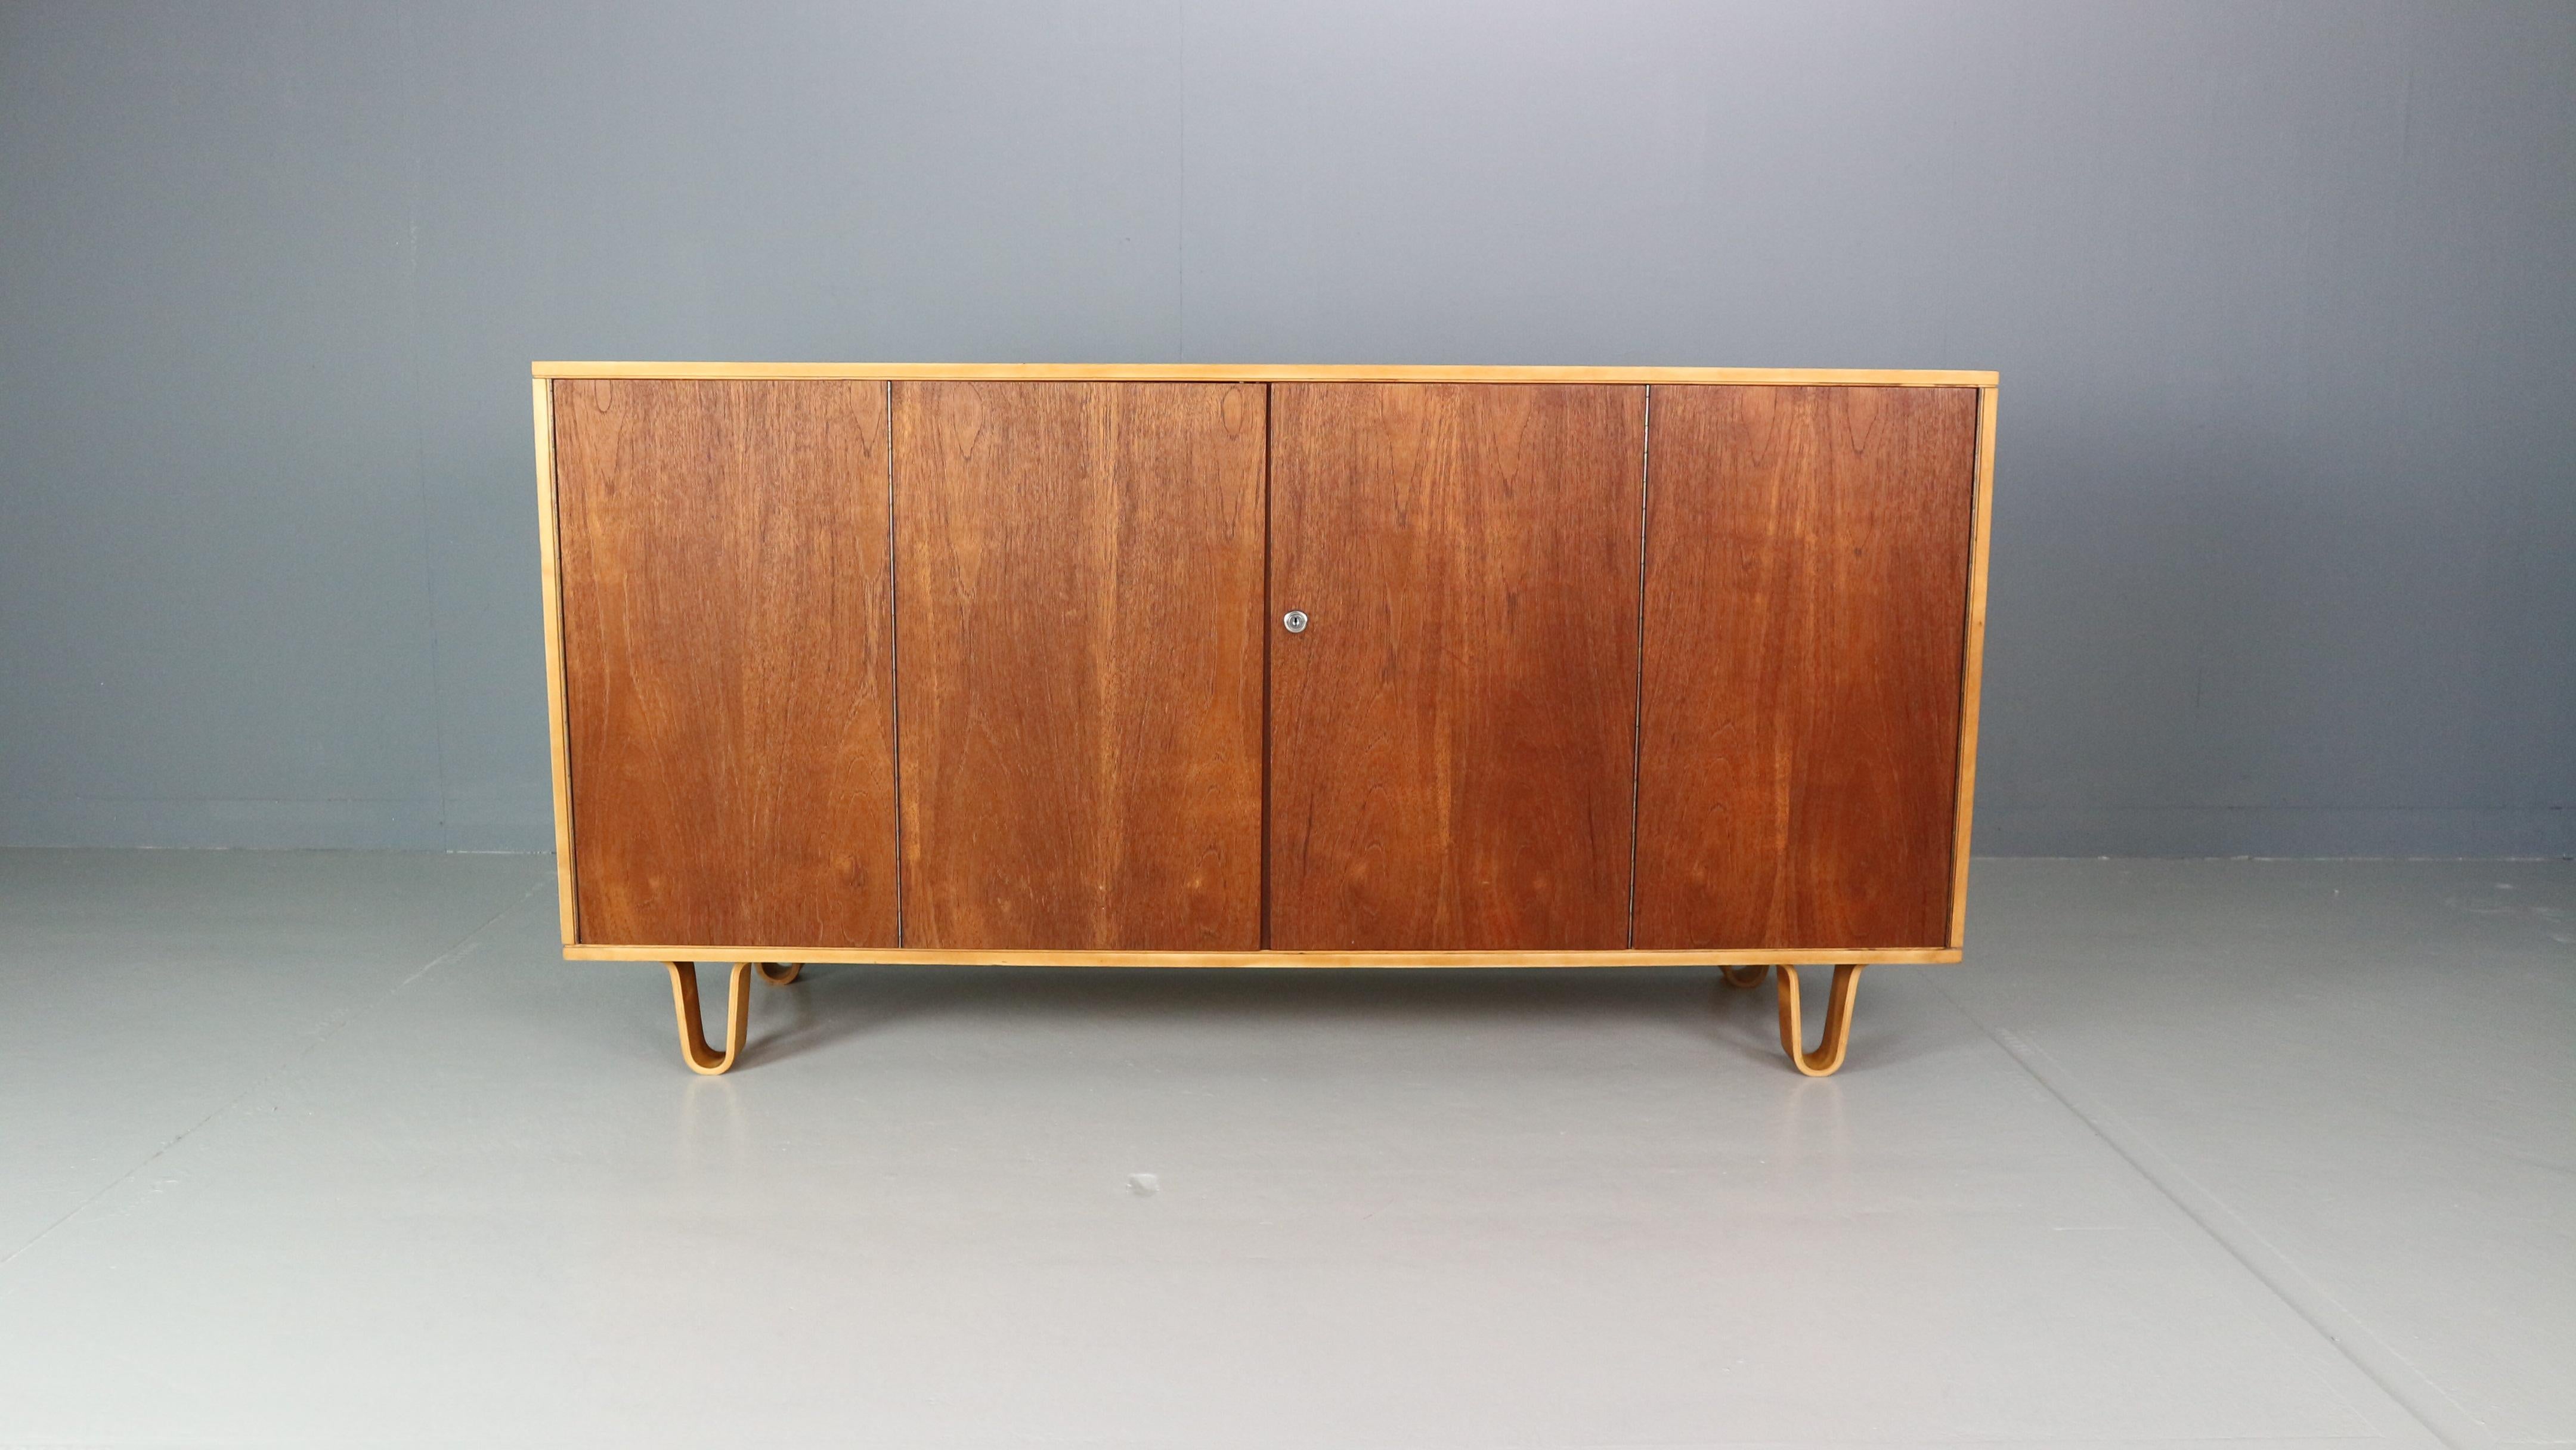 Modernist sideboard model DB02 designed by Cees Braakman, manufactured by Pastoe UMS, Holland 1952. This sideboard has a double folding door with 3 shelves and 4 drawers behind. This sideboard is from the famous birch series by Cees Braakman who